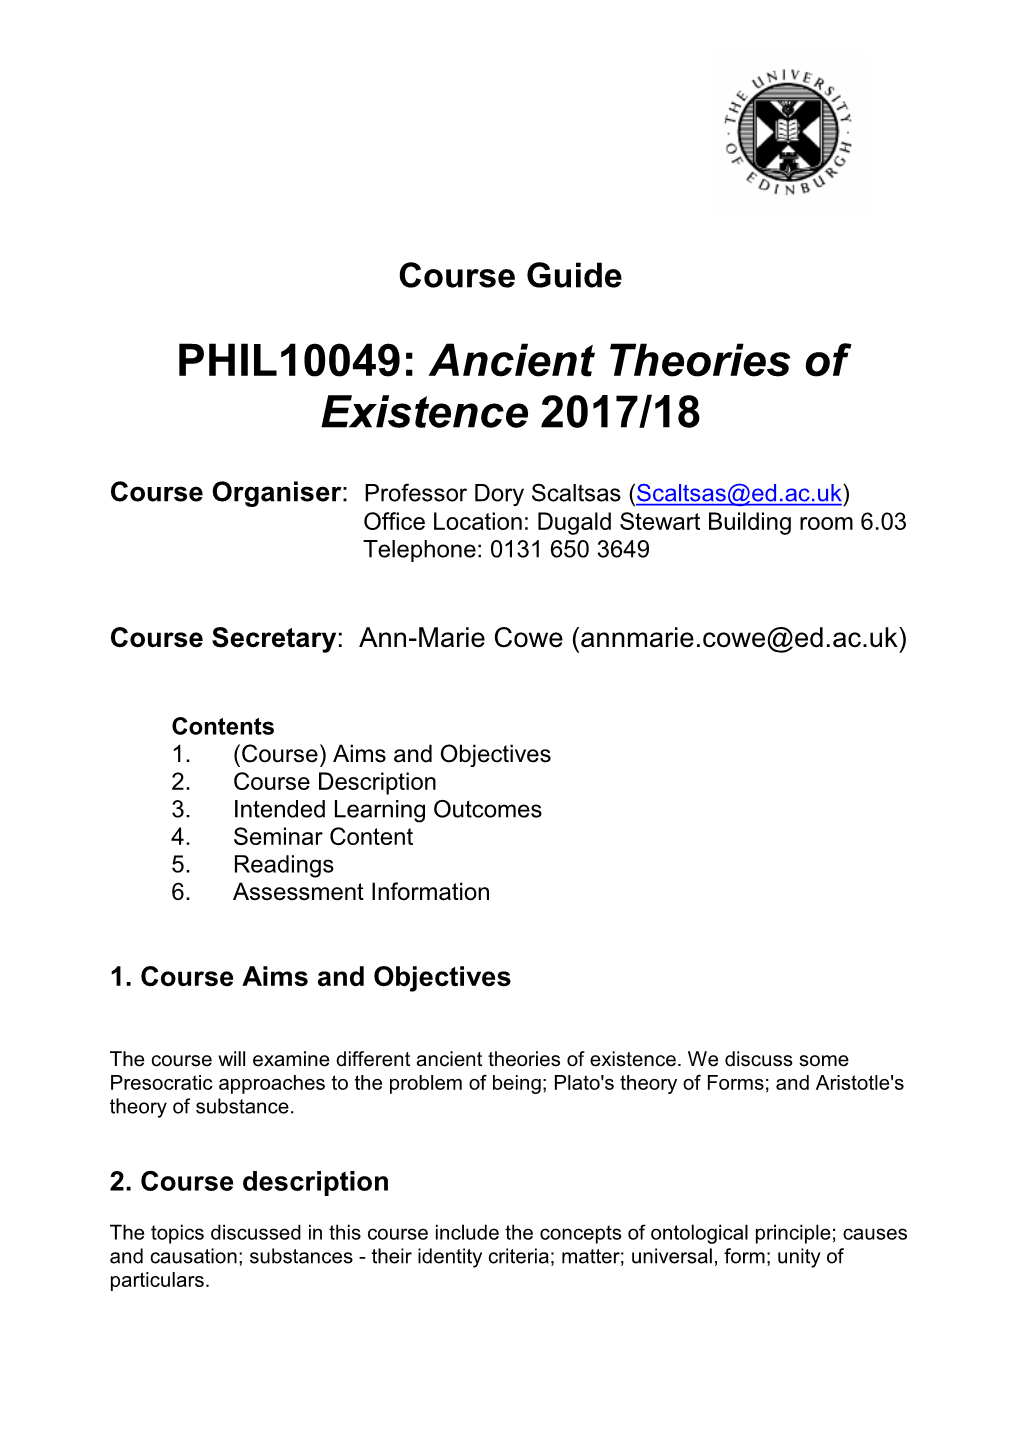 PHIL10049: Ancient Theories of Existence 2017/18